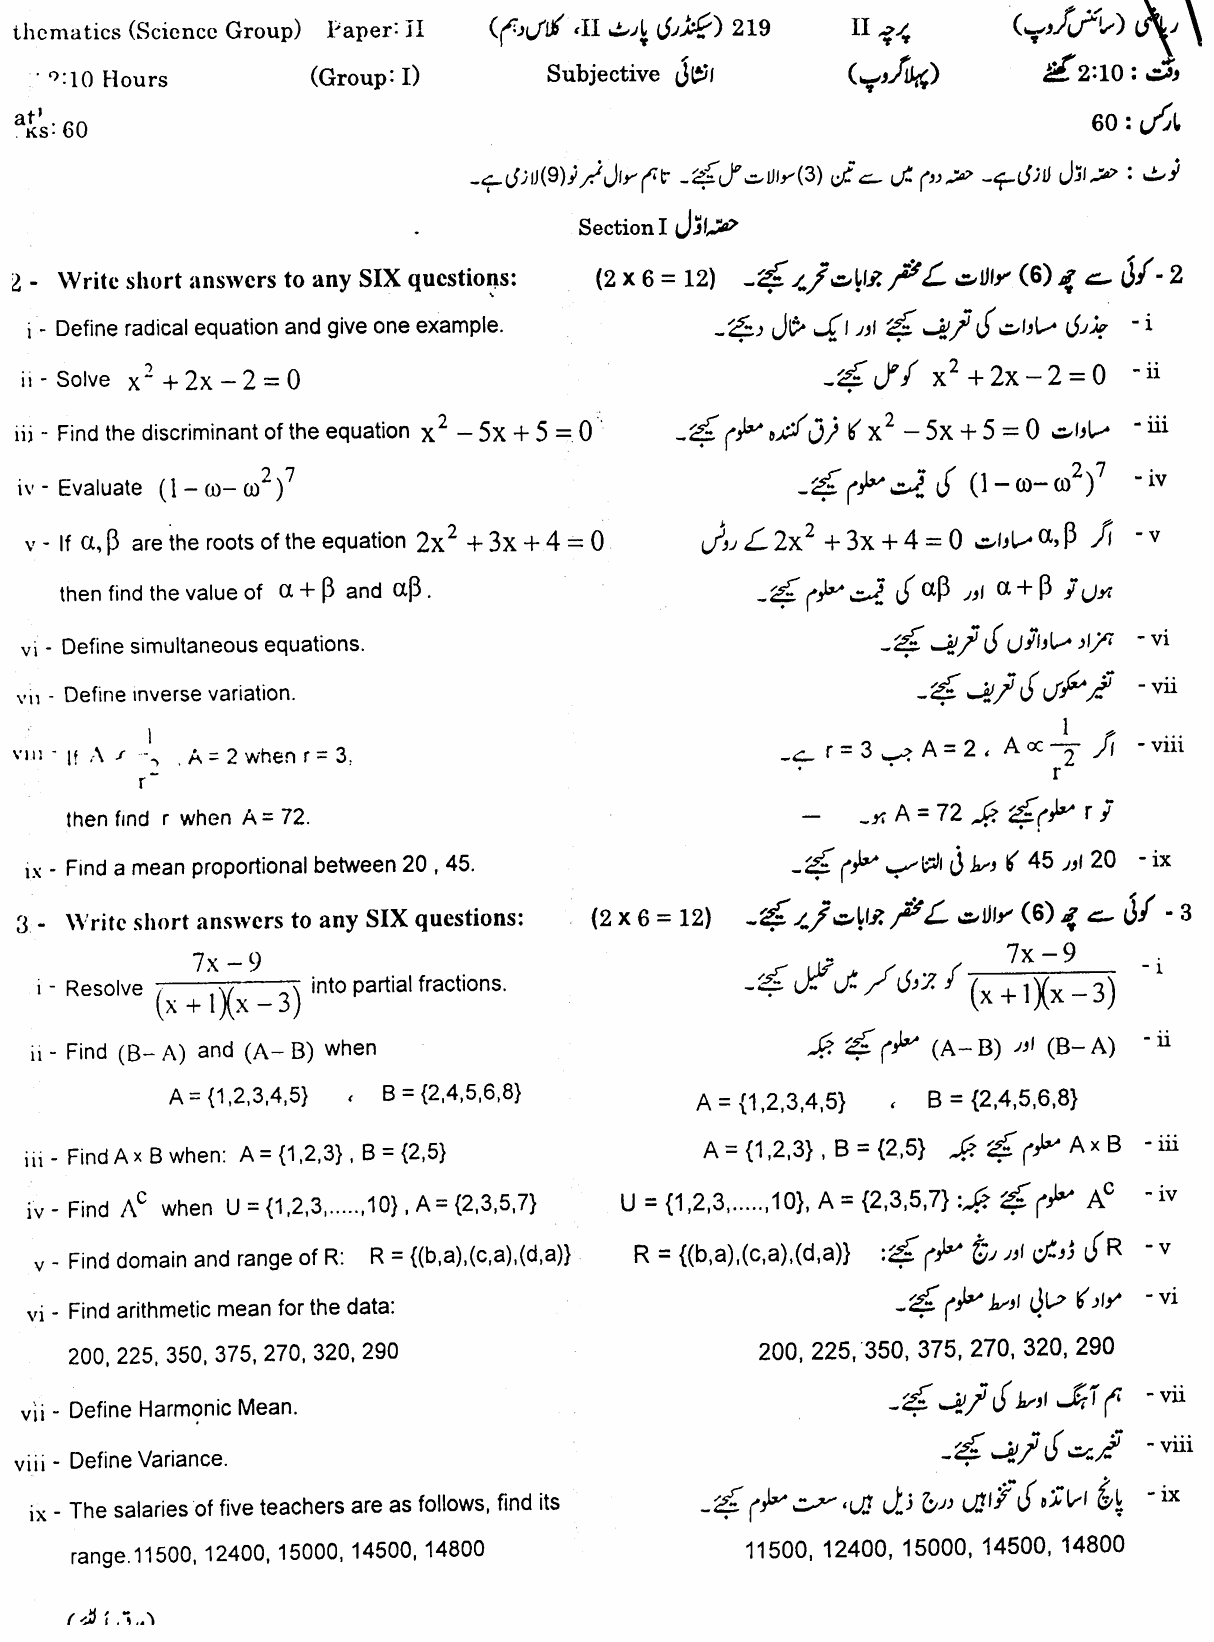 10th Class Mathematics Paper 2019 Gujranwala Board Subjective Group 1